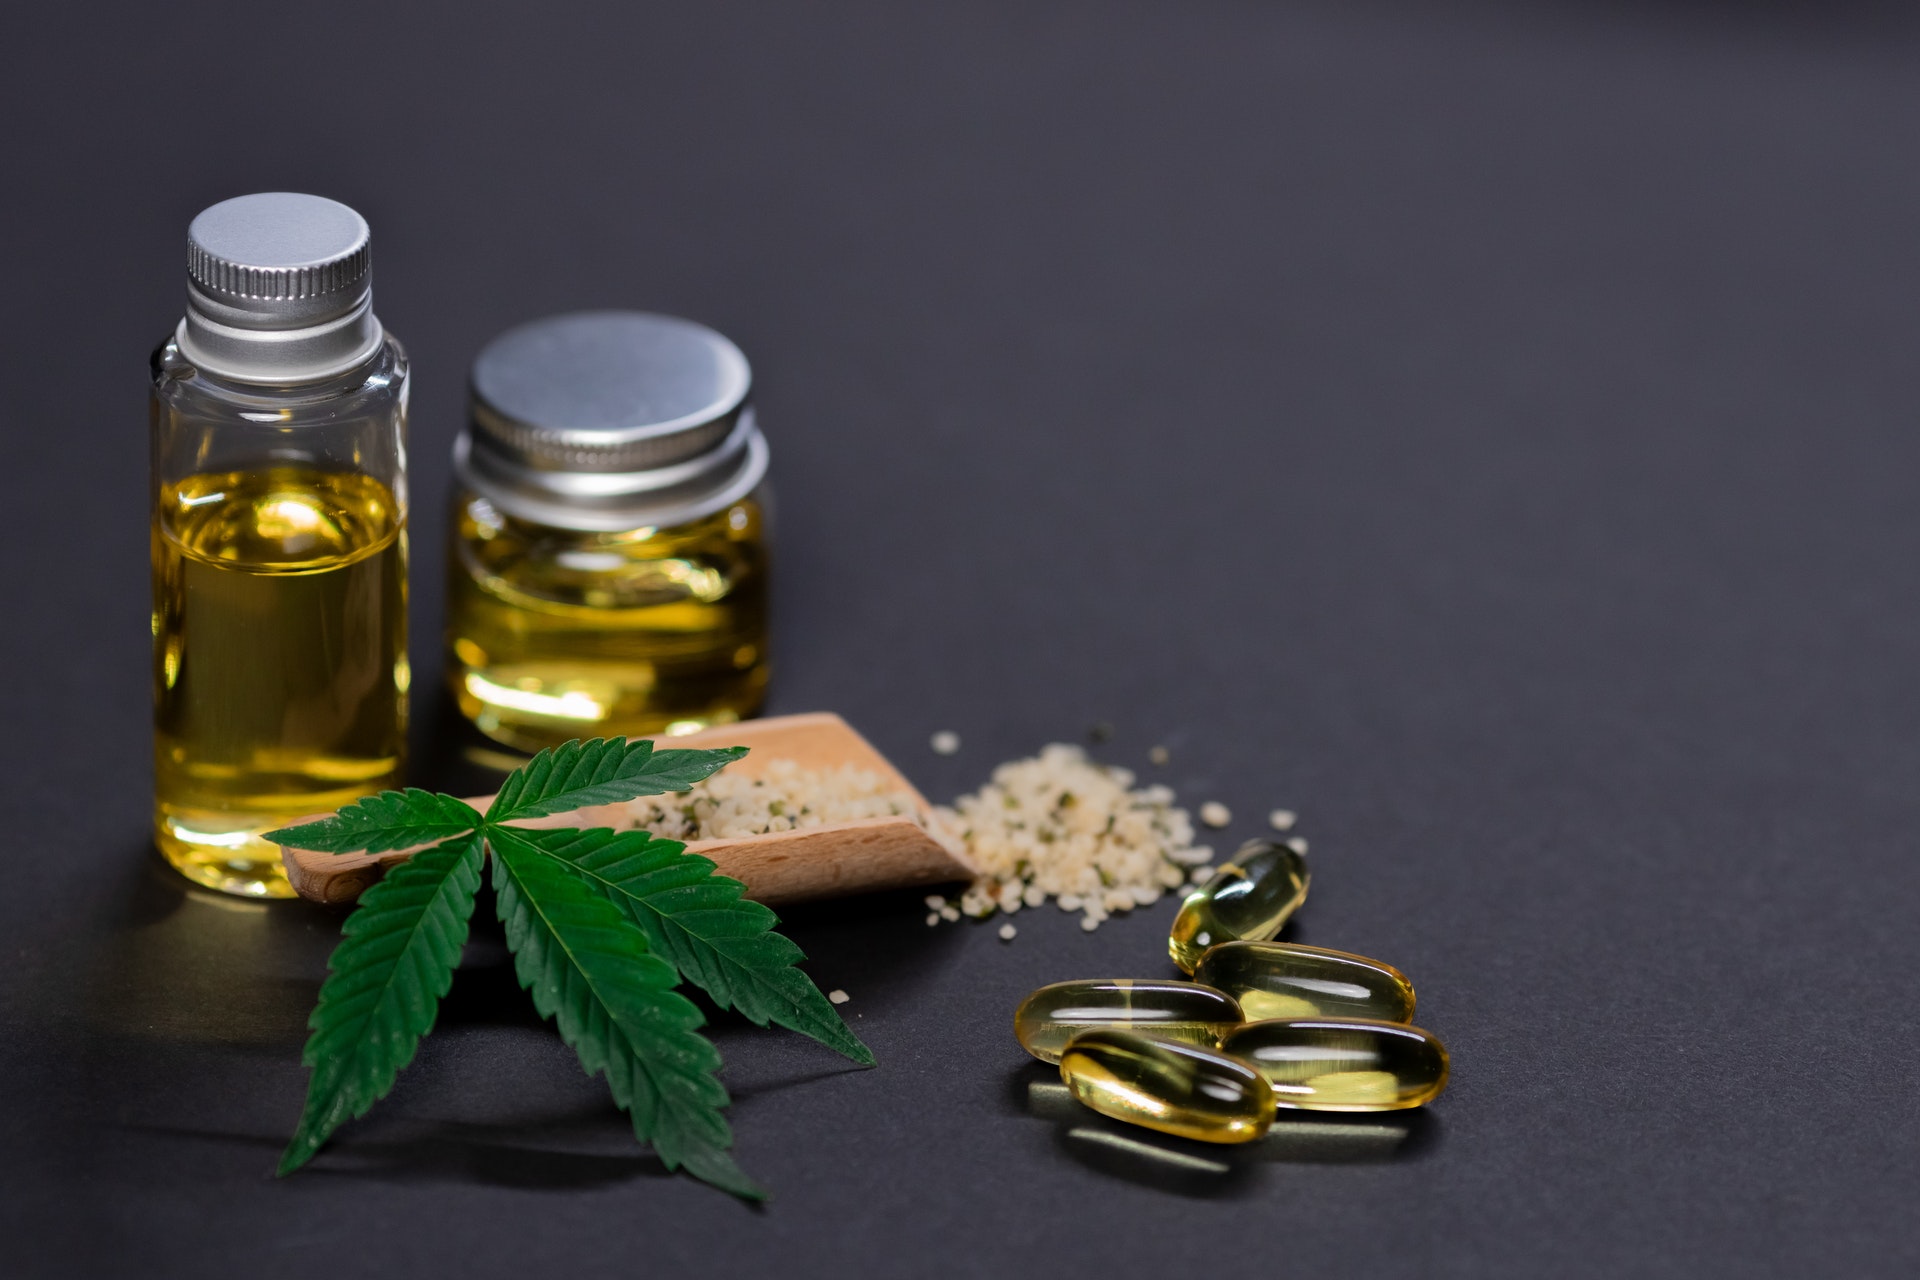 3 Insider Tips for Purchasing CBD Oil to Use at Home3 Insider Tips for Purchasing CBD Oil to Use at Home